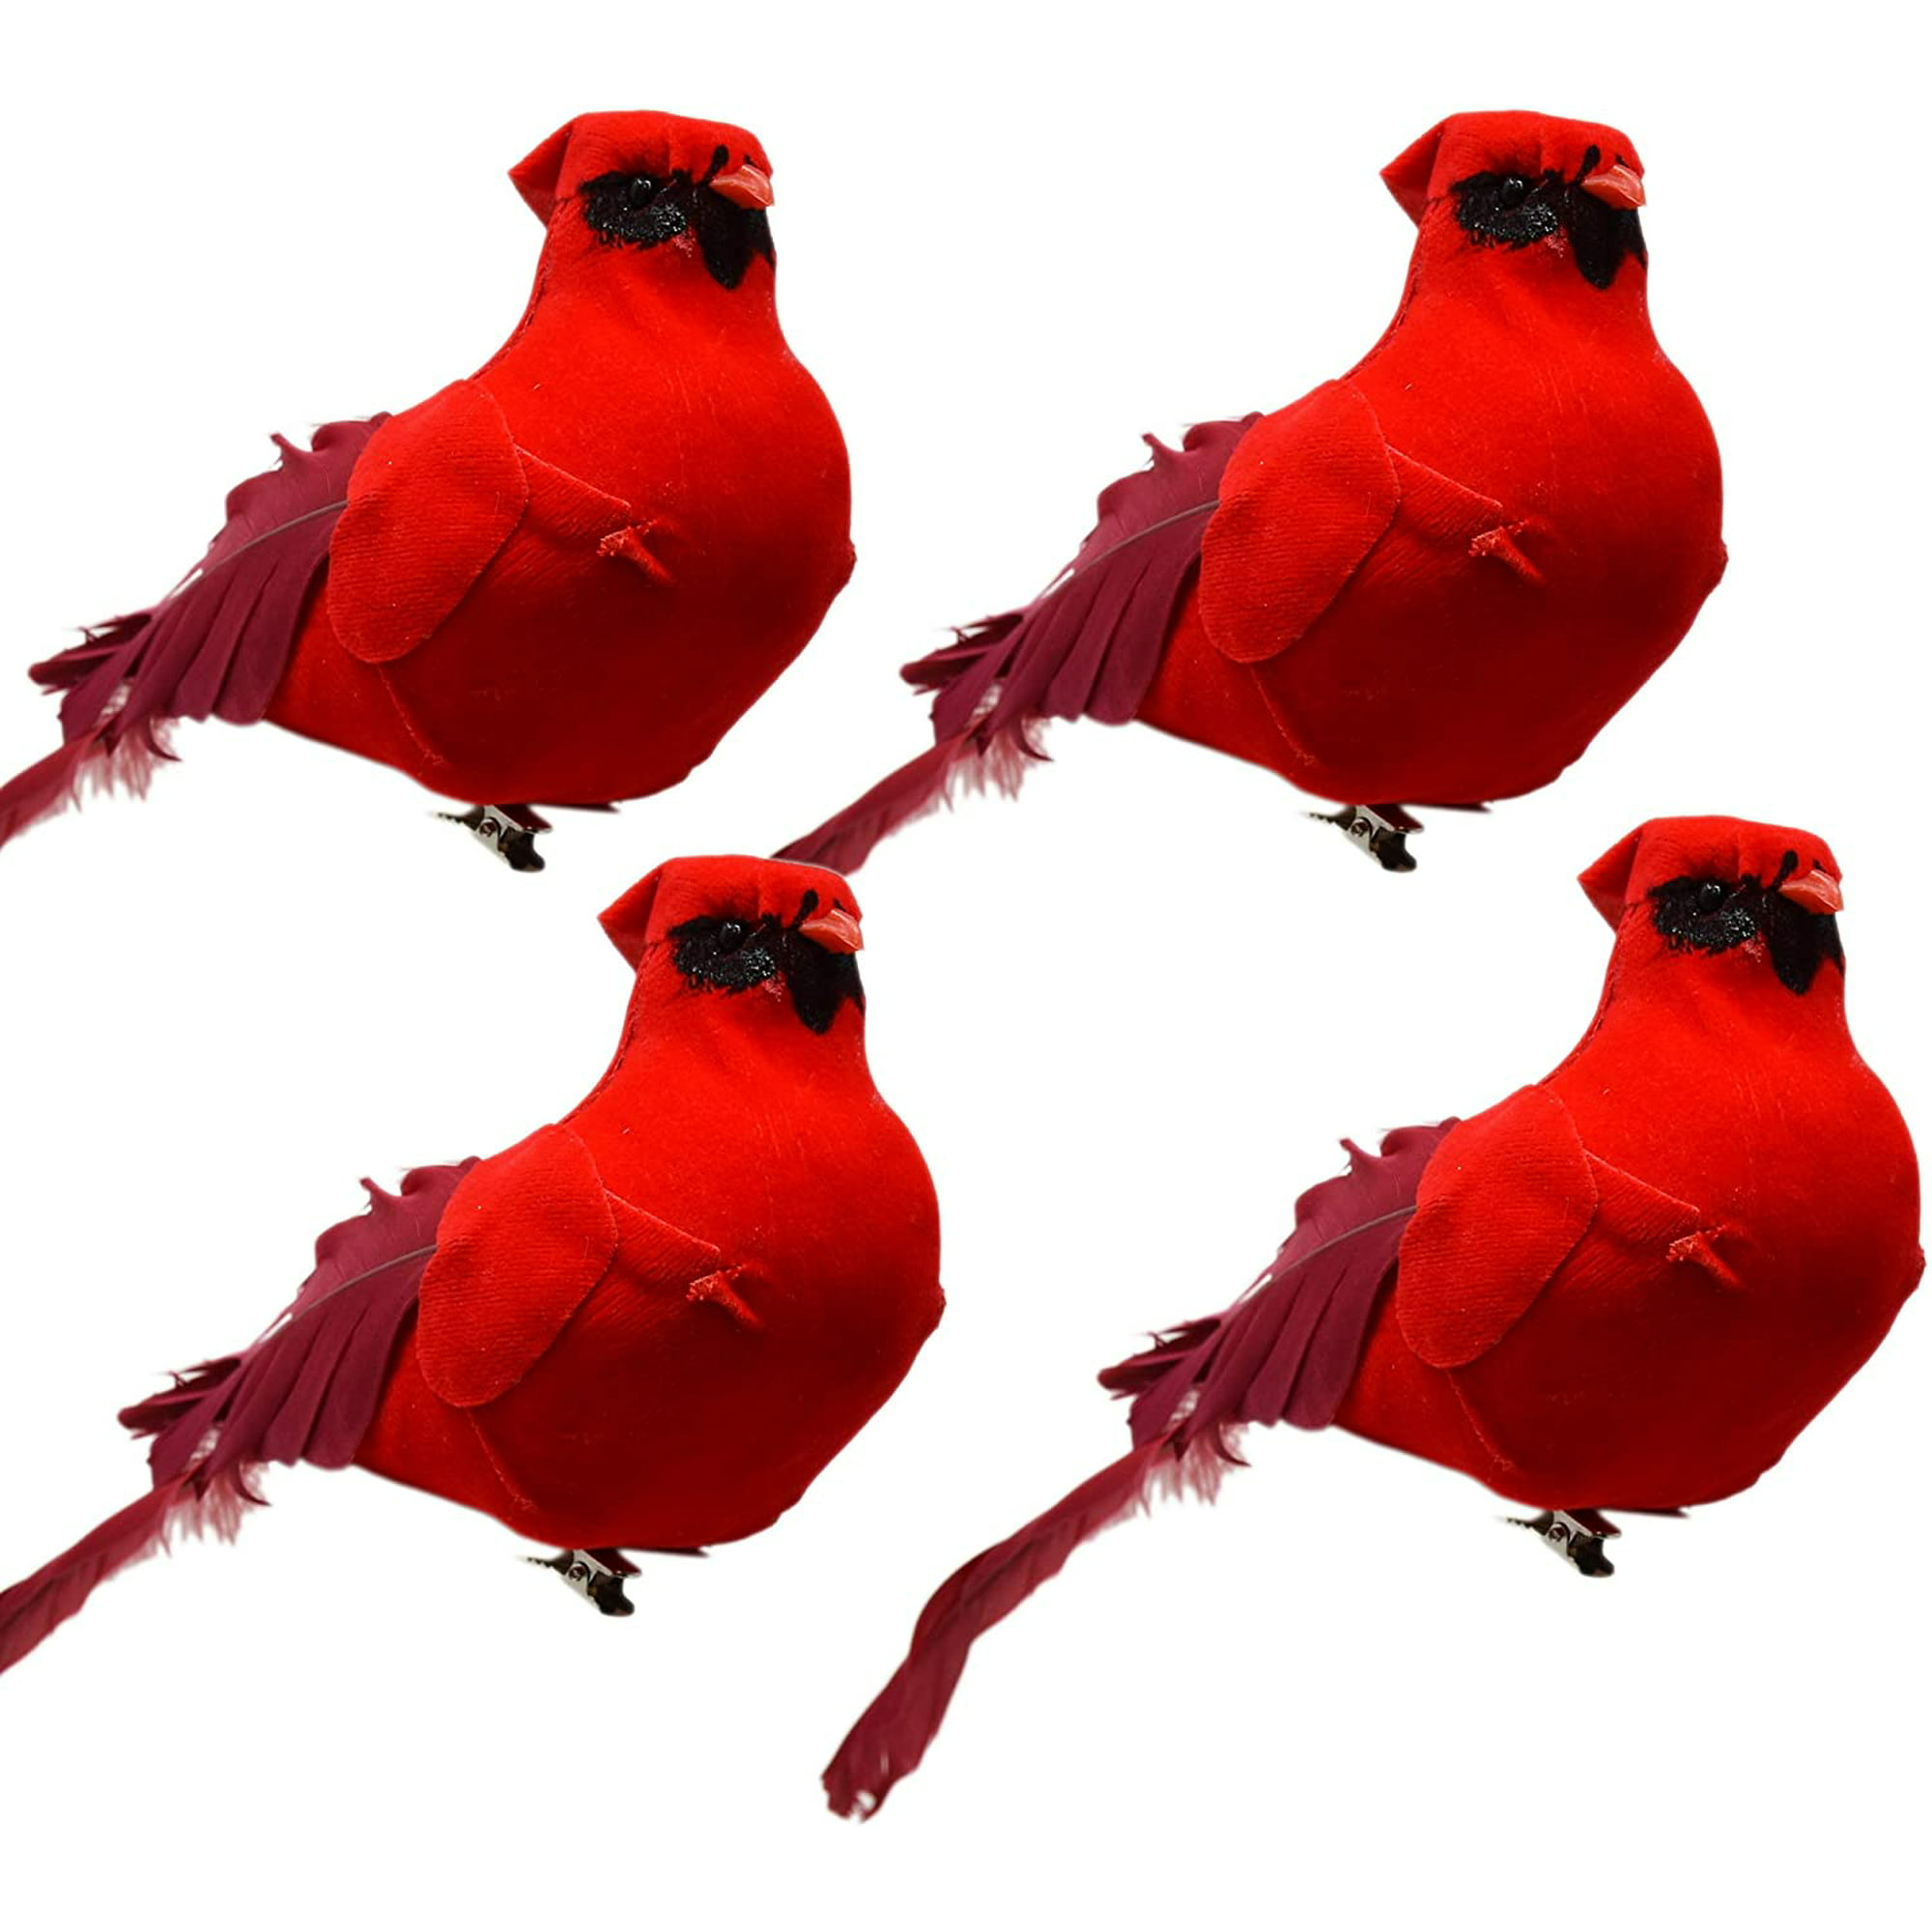 Large Christmas Cardinal Clip on Tree Ornaments Bird Decorations Pack of 4 Bright Red Artificial Feathered Cardinals 9.5 Inch for Wreaths Garland Centerpieces Craft Decorations by Gift Boutique 